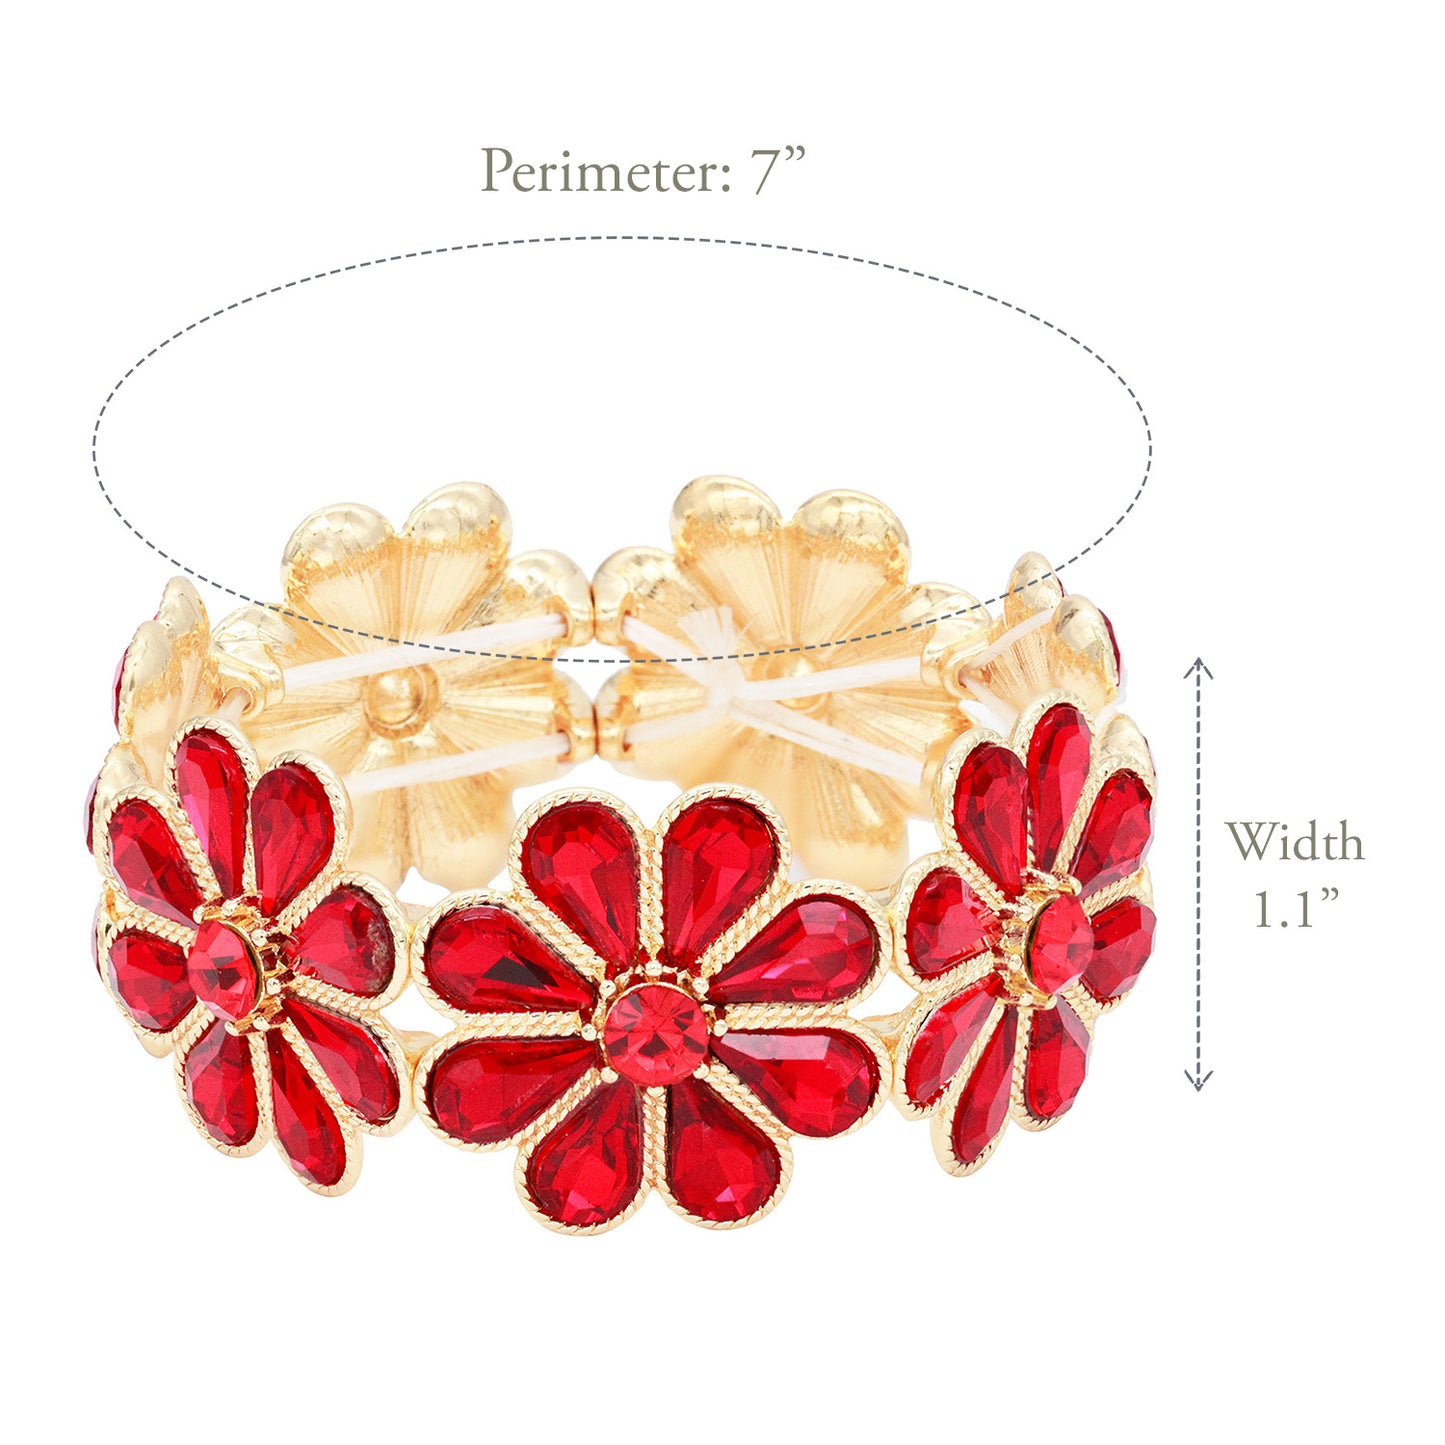 Lavencious Flower Shape Elastic Stretch Bracelet Party Jewelry for Women 7"(Gold Red)